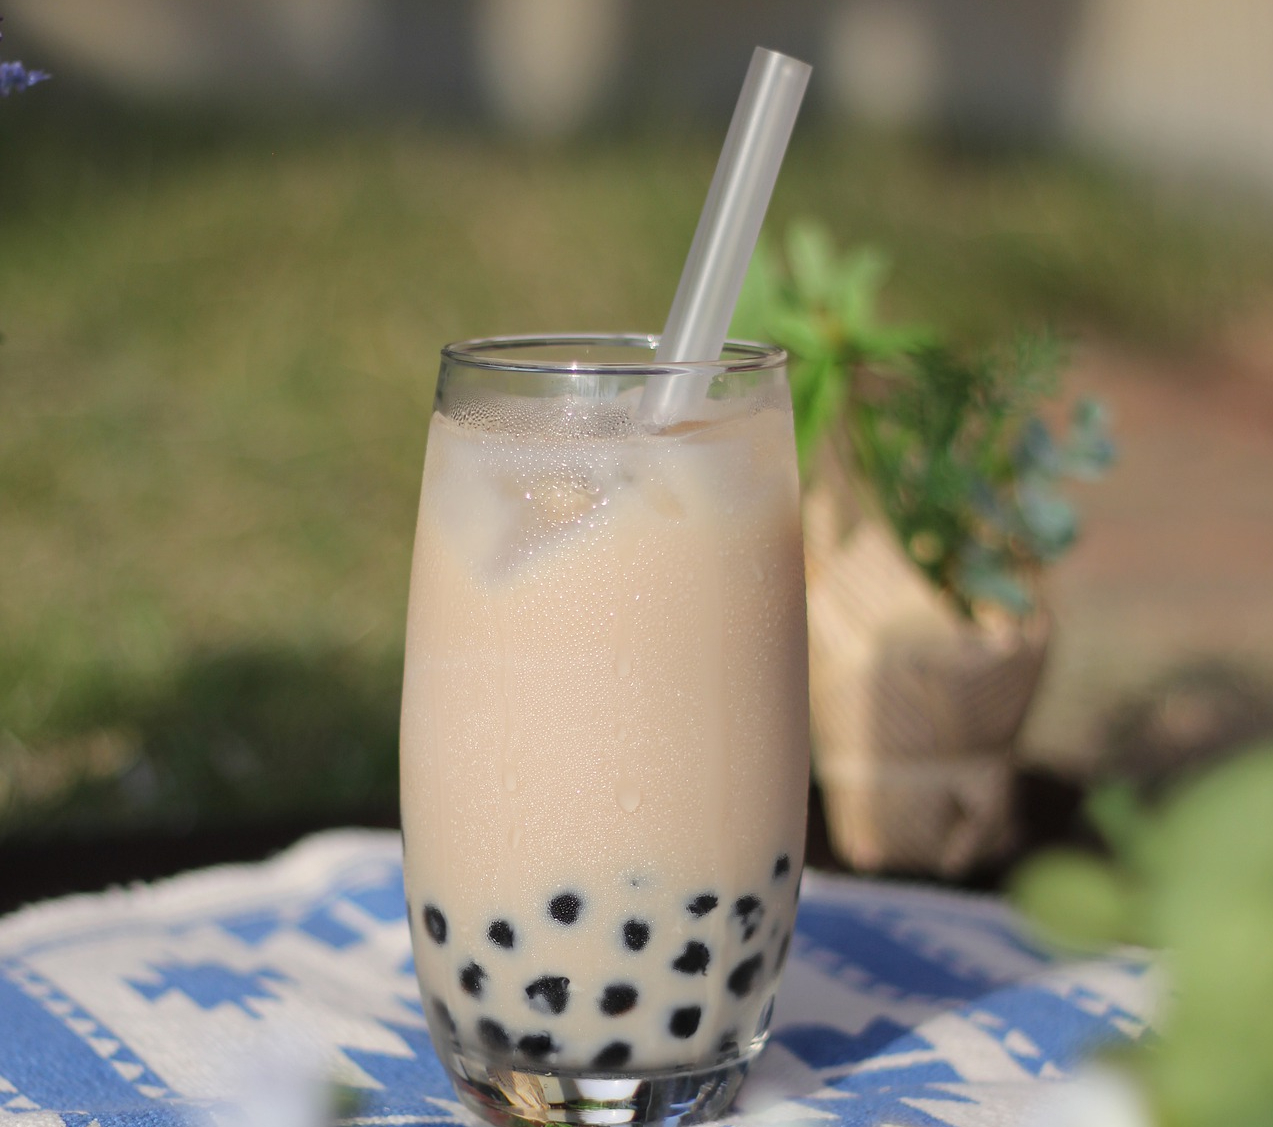 Cool Off With Boba Tea at Mr. Wish